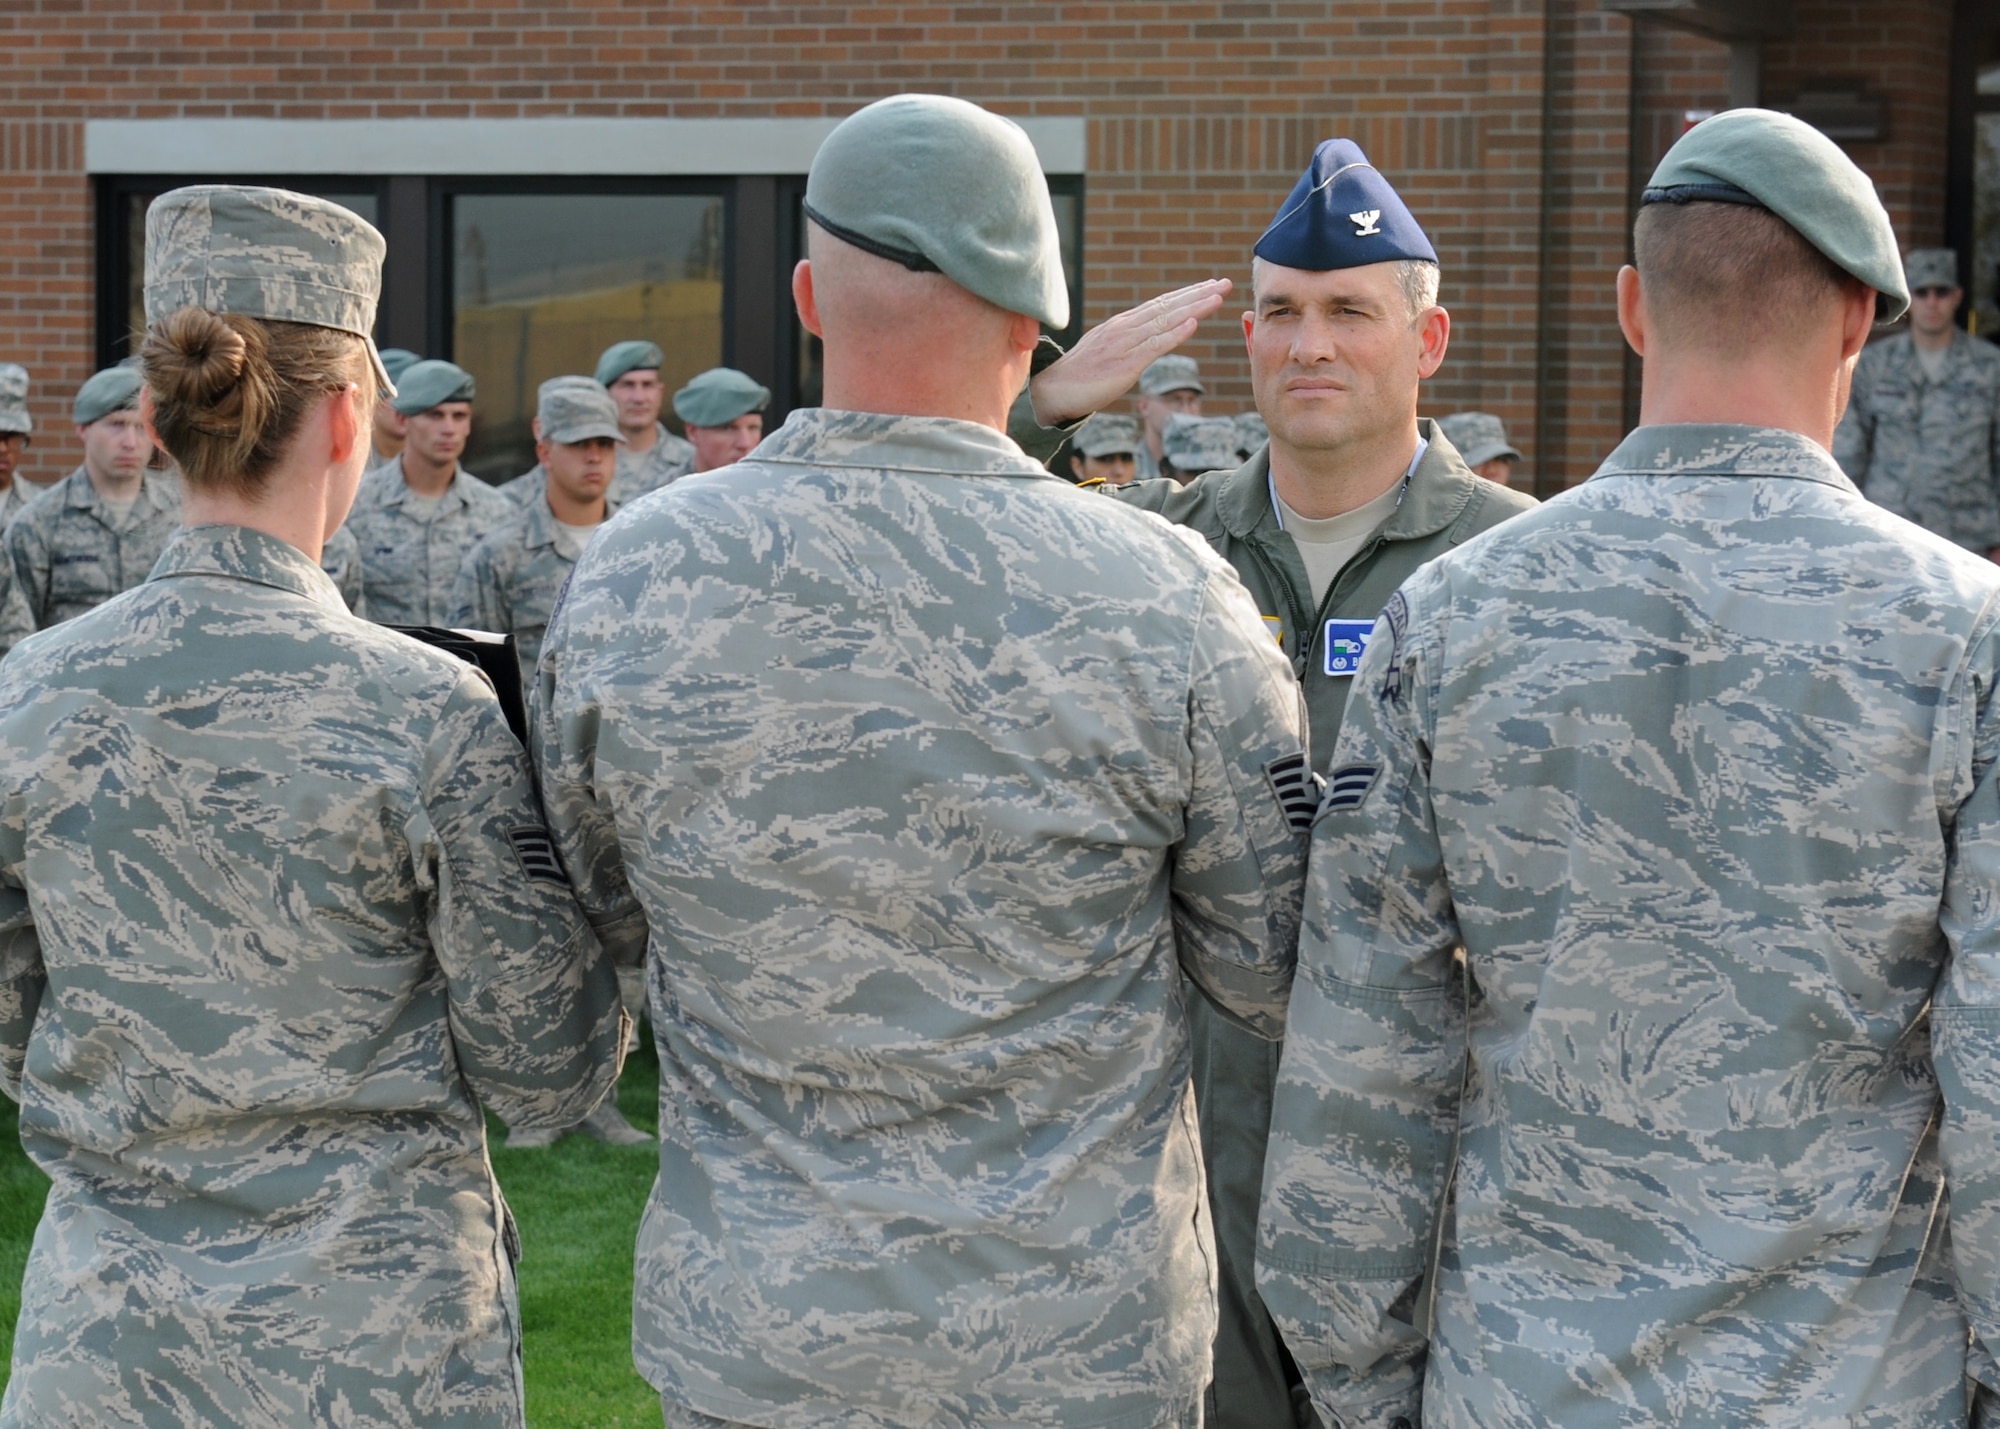 Col. Brian Newberry, 92nd Air Refueling Wing commander, renders a salute to the colors presented by Staff Sgt. Elcke Fromm, 336th Training Group commander's support staff, Tech Sgt. Brandon Biddle, 22nd Training Squadron Survival Evasion Resistance Escape specialist, and Senior Airman Anthony Pinque, 22nd TRS SERE specialist, during a Retreat Ceremony honoring prisoners of war and those missing in action at Fairchild Air Force Base, Wash. Sept. 21, 2012. The ceremony was held at the 336th Training Group headquarters building flagpole. (U.S. Air Force photo by Staff Sgt. Michael Means)